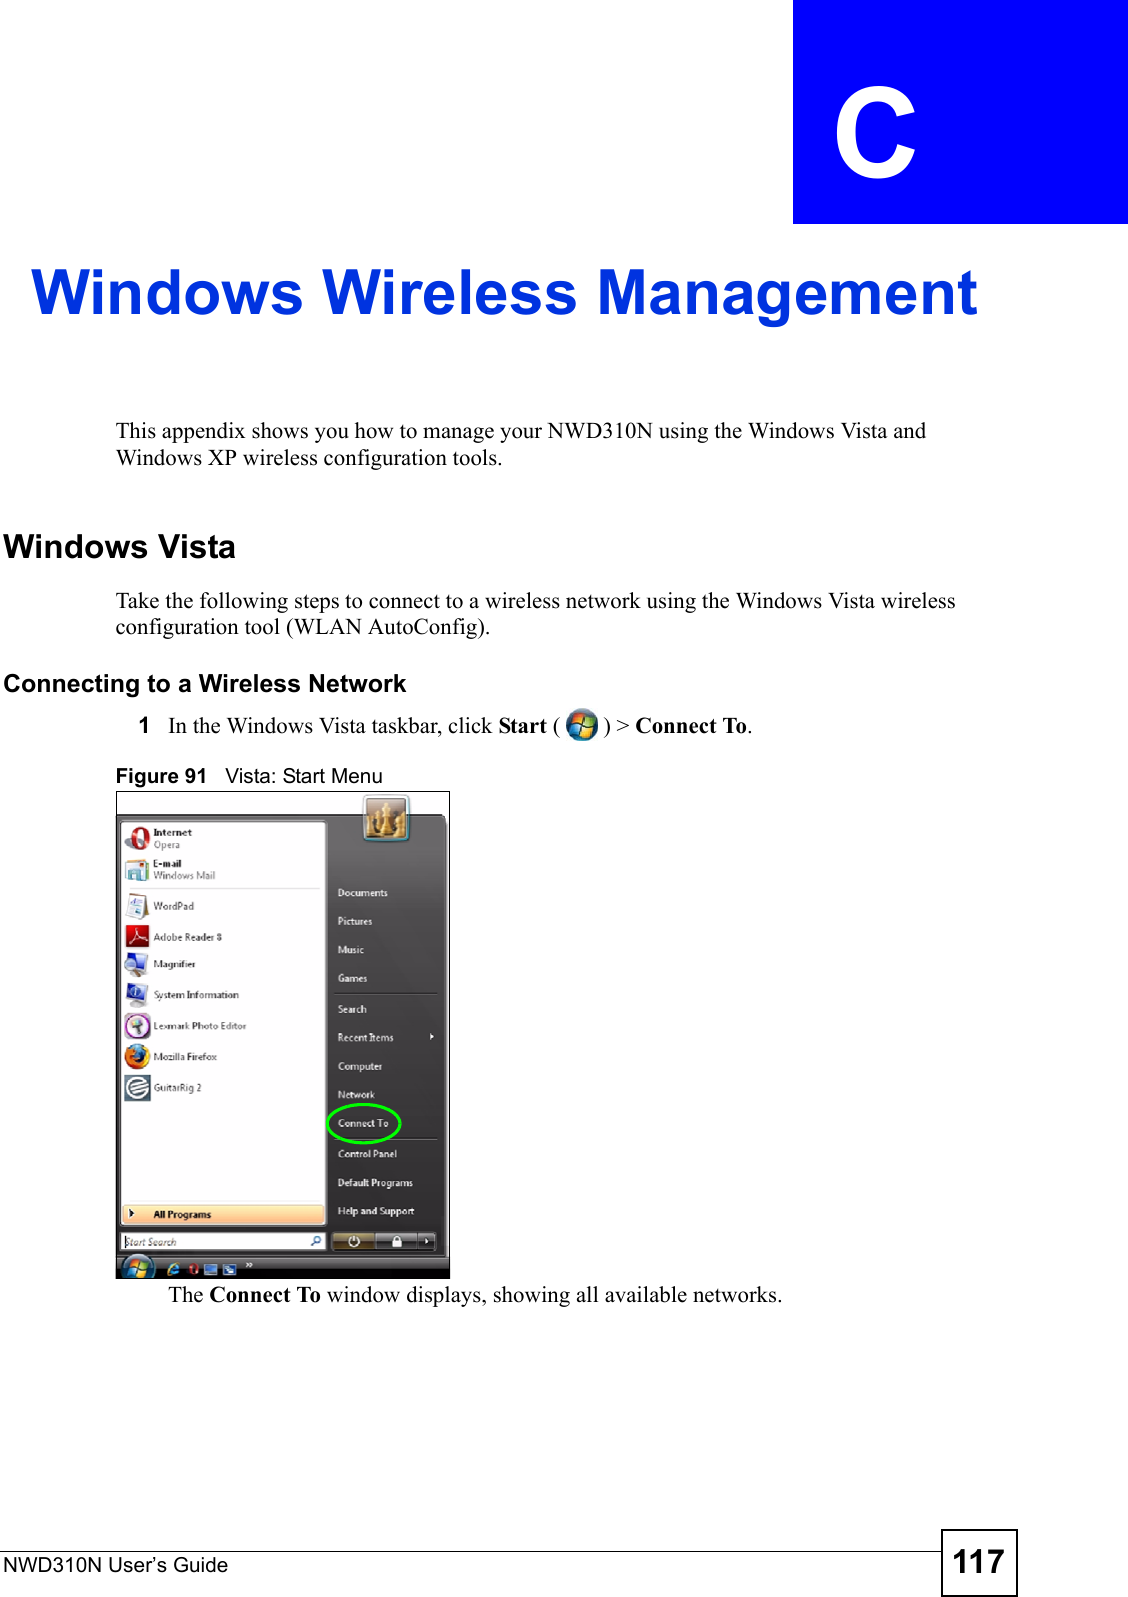 NWD310N User’s Guide 117APPENDIX  C Windows Wireless ManagementThis appendix shows you how to manage your NWD310N using the Windows Vista and Windows XP wireless configuration tools.Windows VistaTake the following steps to connect to a wireless network using the Windows Vista wireless configuration tool (WLAN AutoConfig).Connecting to a Wireless Network1In the Windows Vista taskbar, click Start () &gt; Connect To. Figure 91   Vista: Start MenuThe Connect To window displays, showing all available networks. 